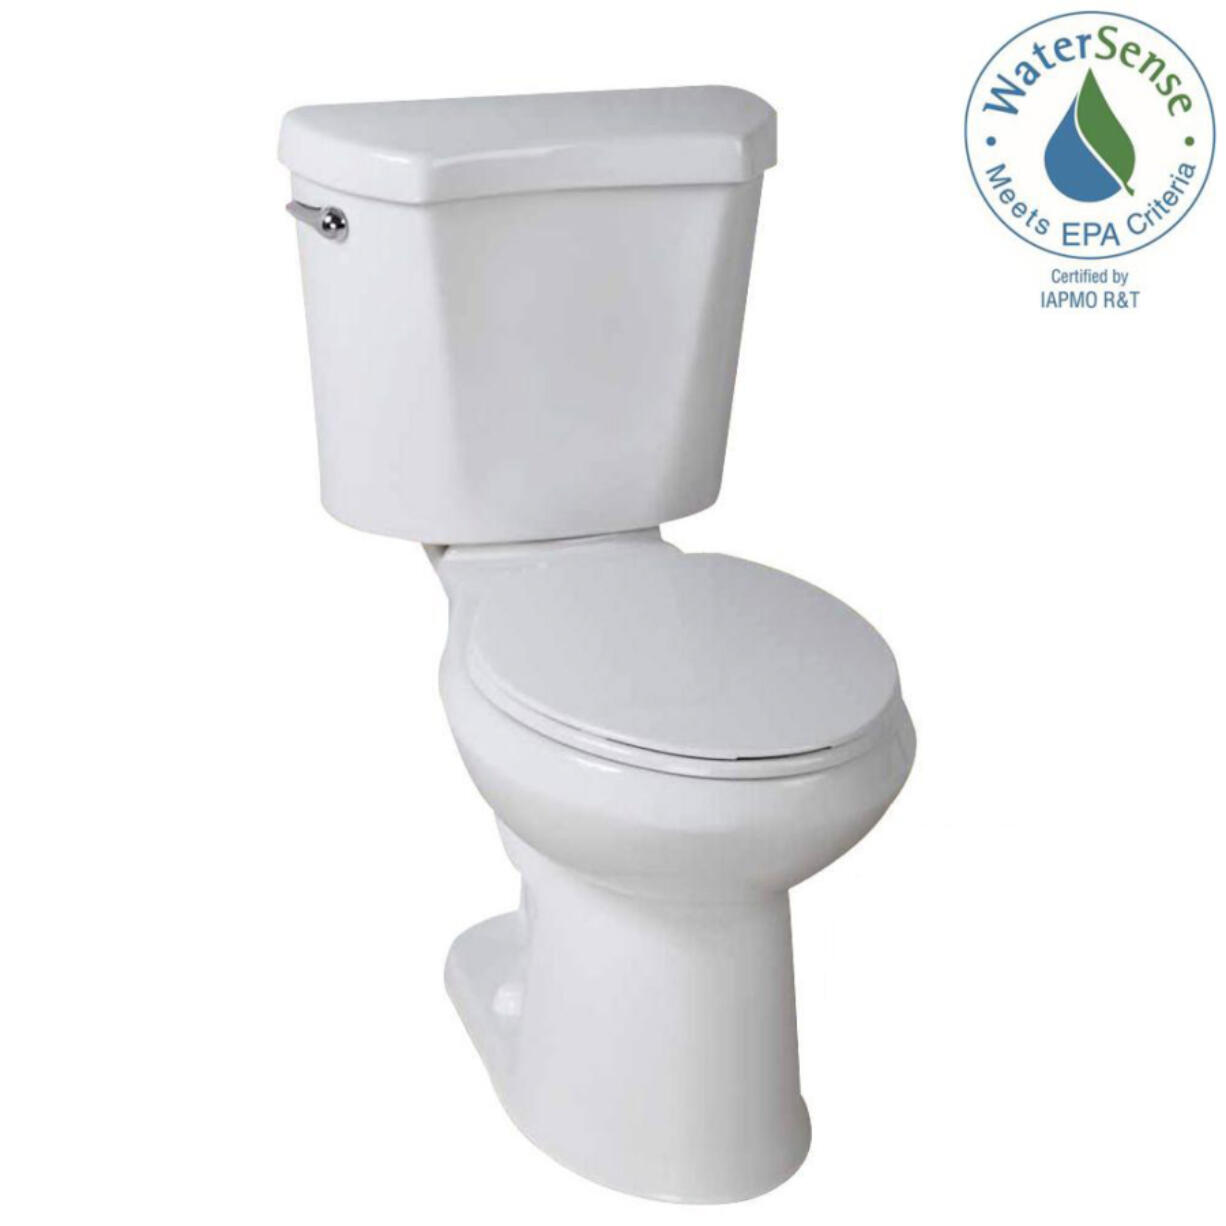 A Glacier Bay 1.28-gallon high efficiency toilet can save hundreds of dollars a year on your water bill.